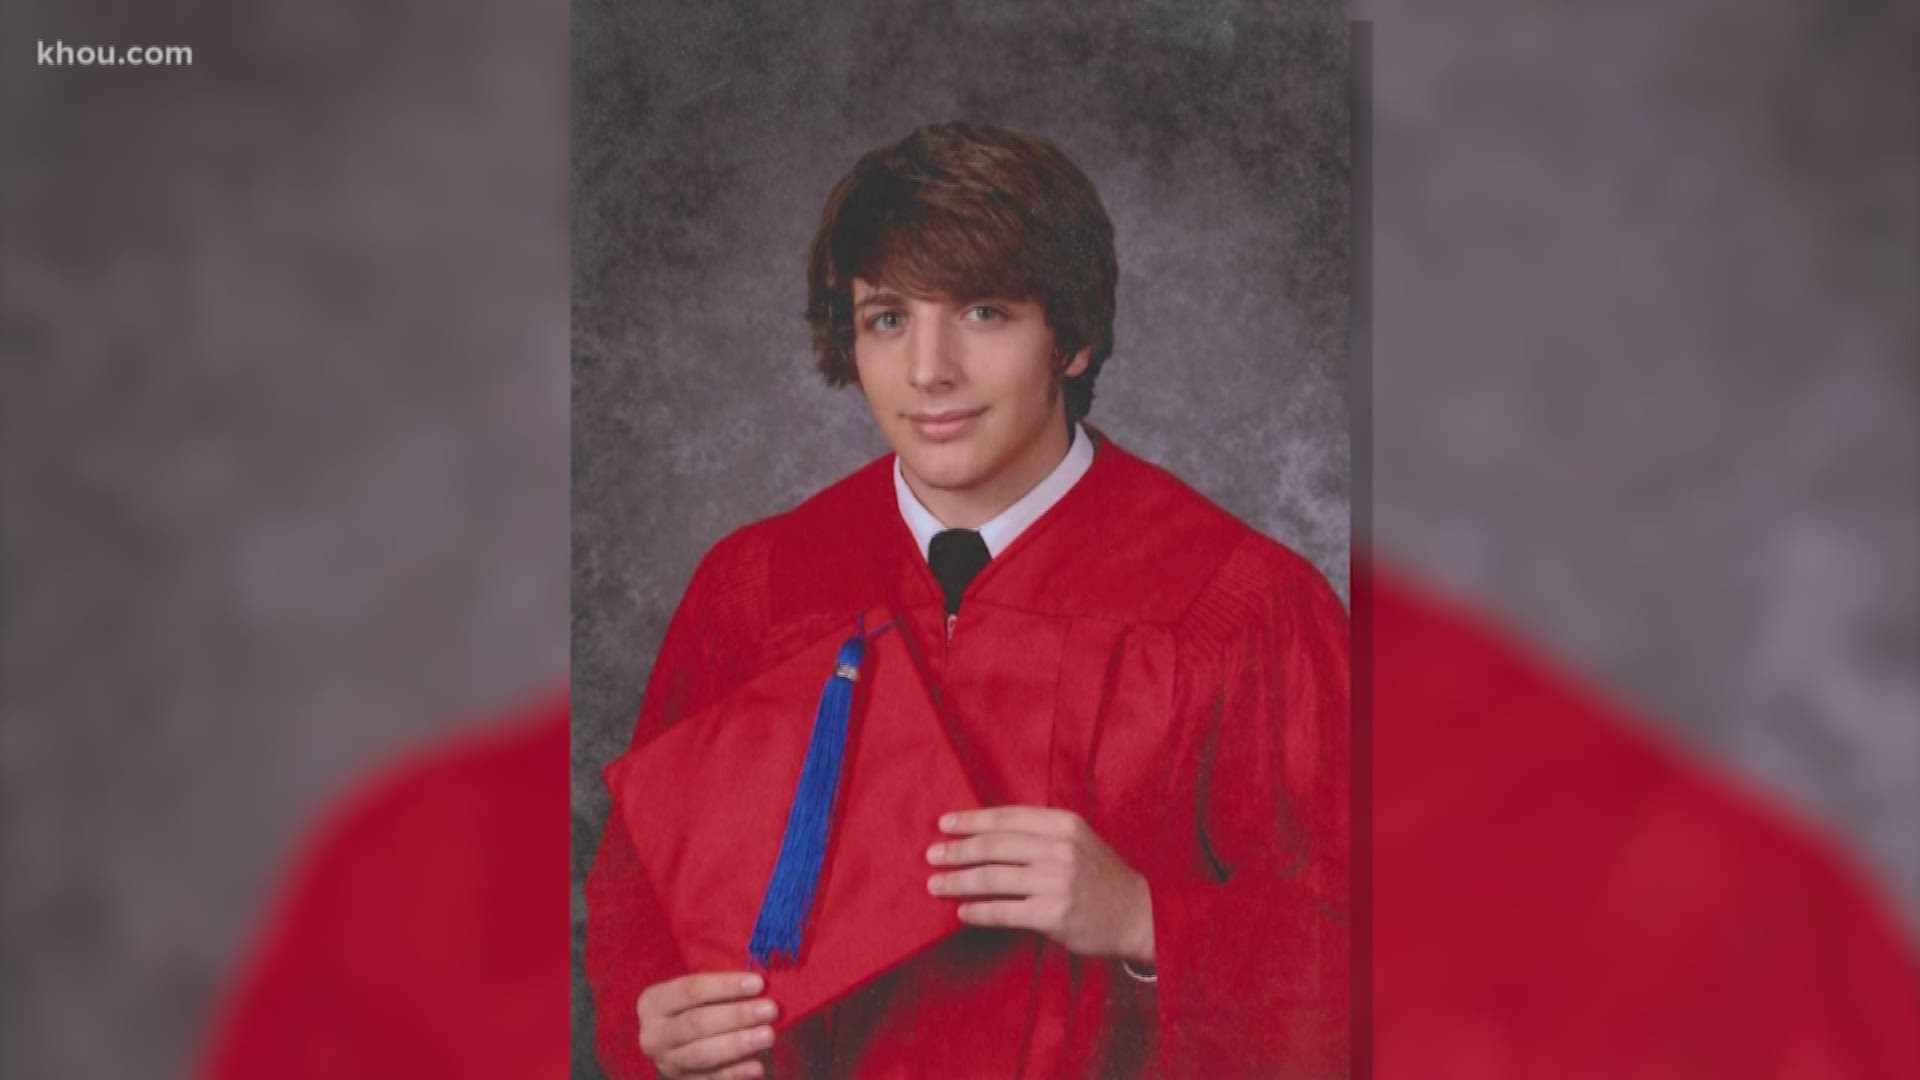 Police are looking for the driver who hit and killed a 19-year-old in League City. The teen, identified as River Russell, was found lying near a ditch on Monday in the 1800 block of F.M. 270 South.